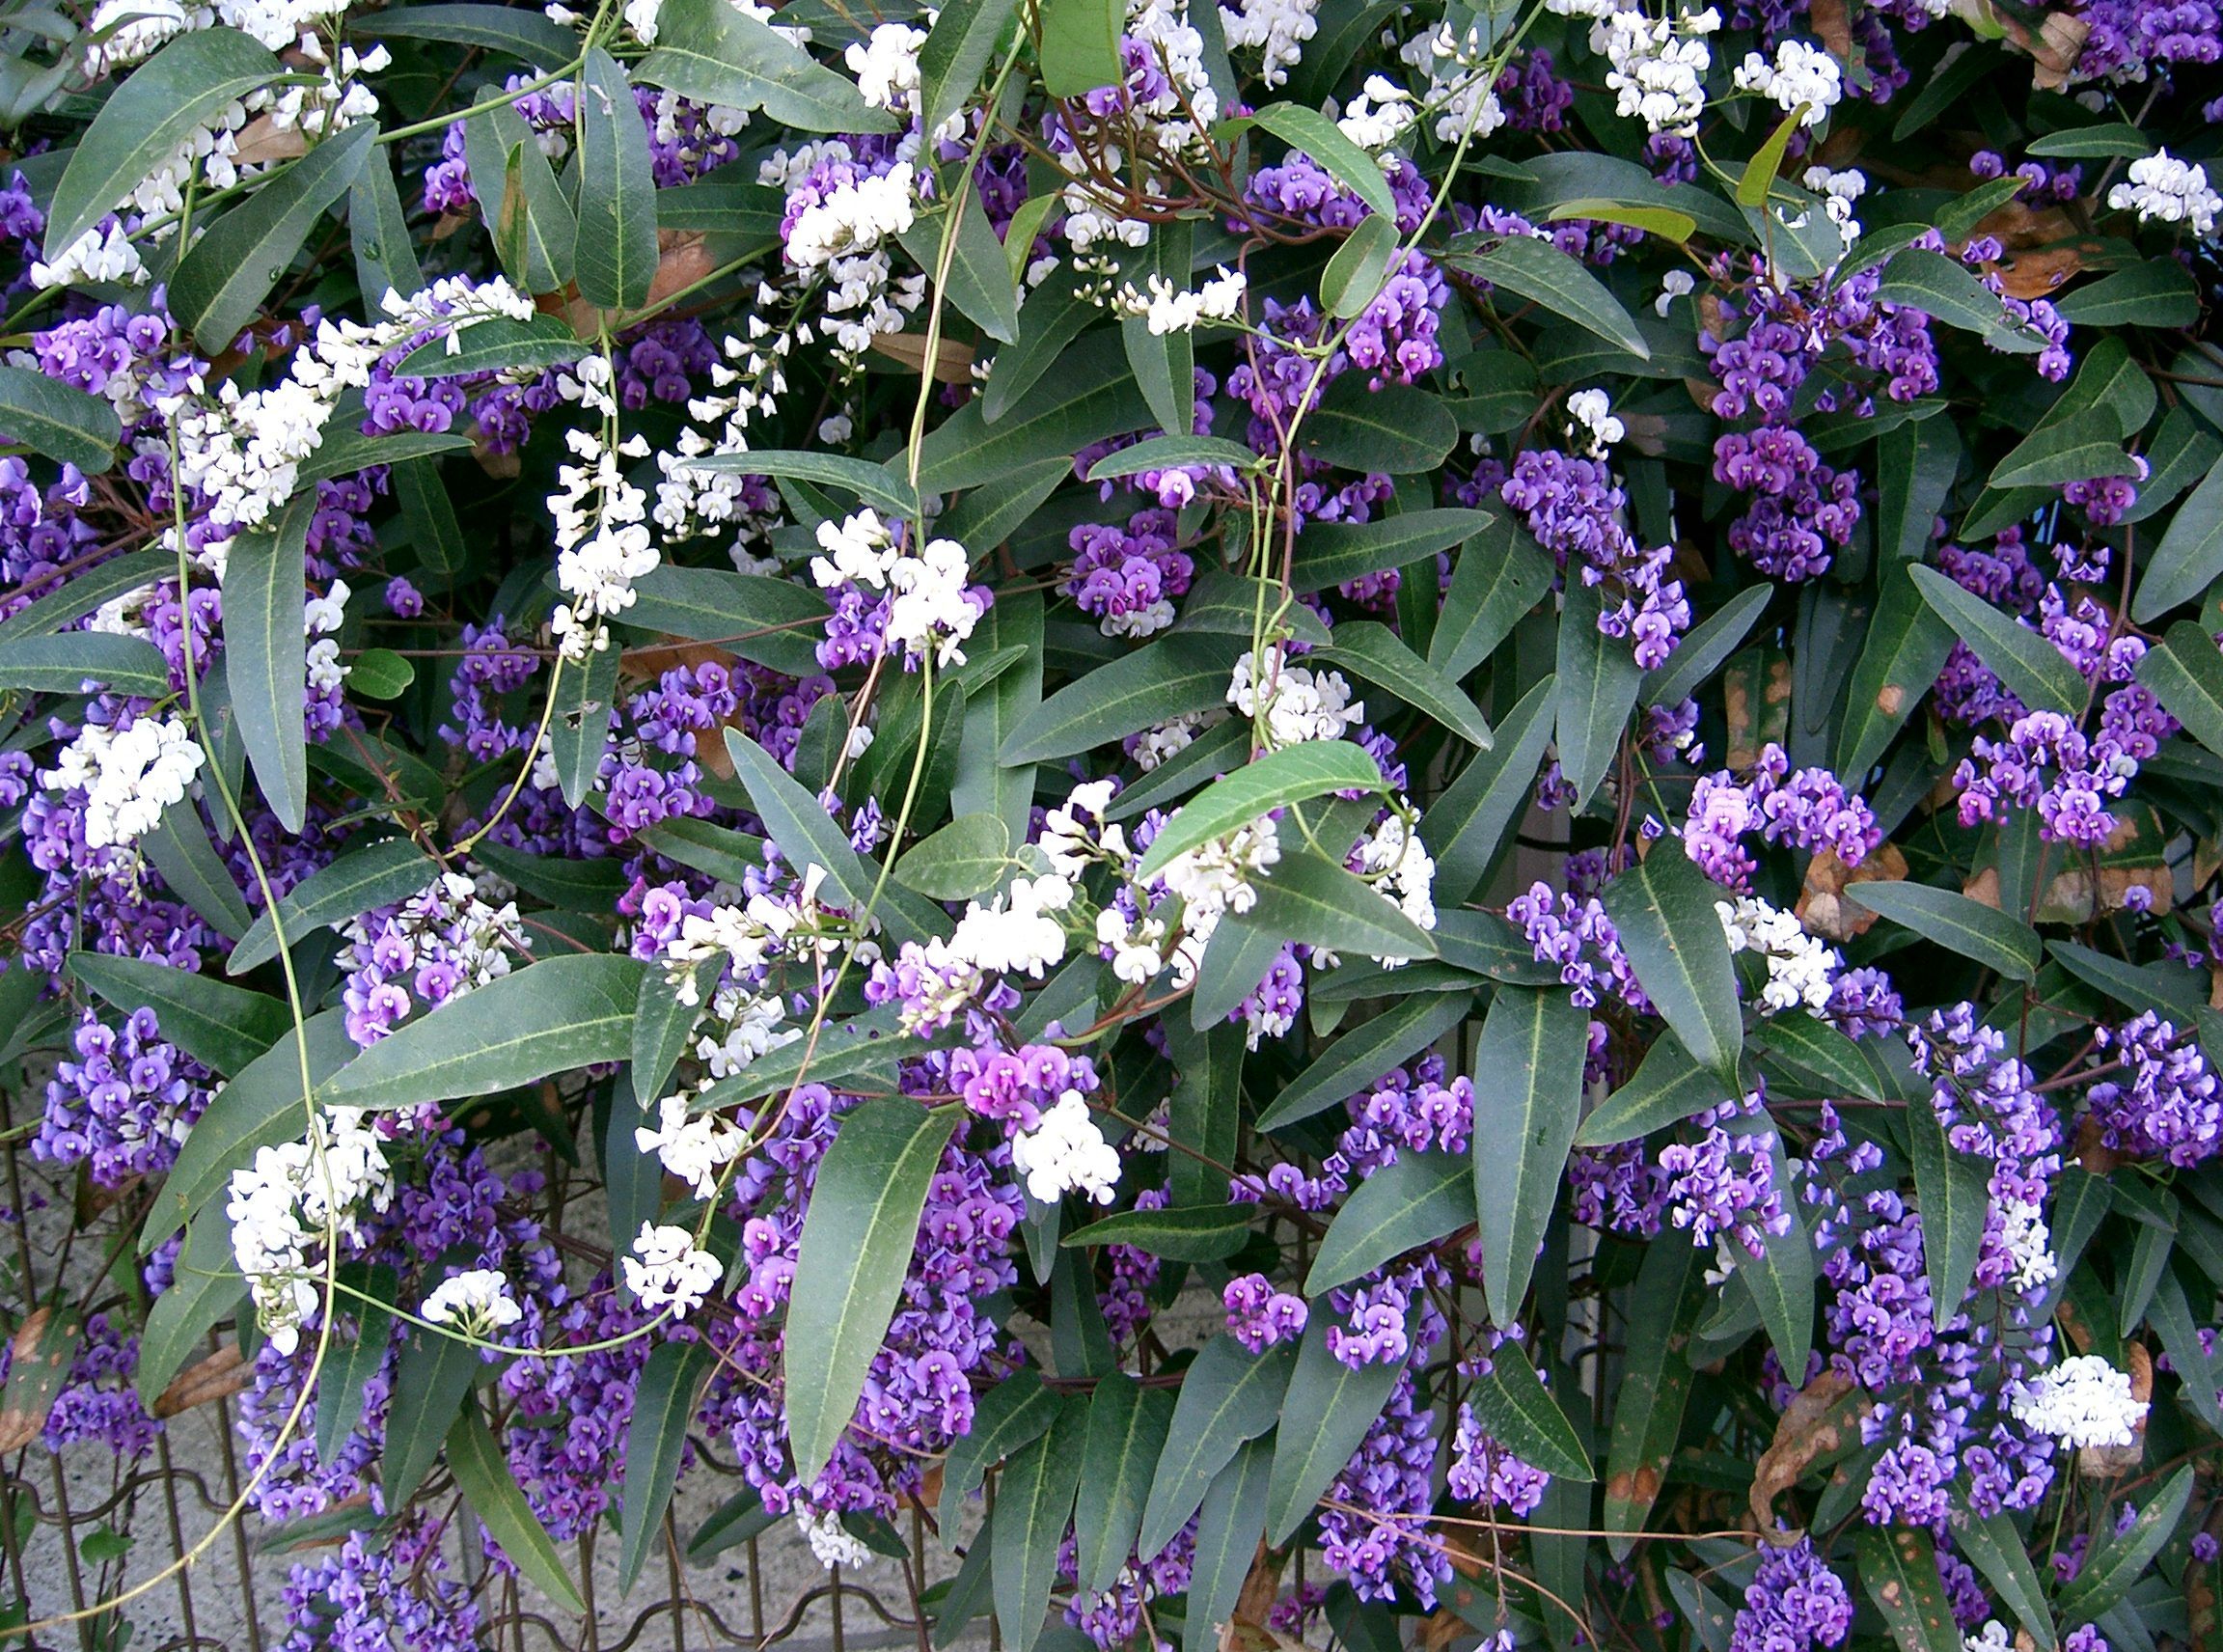 Hardenbergia Is another Excellent Flower Choice for winter